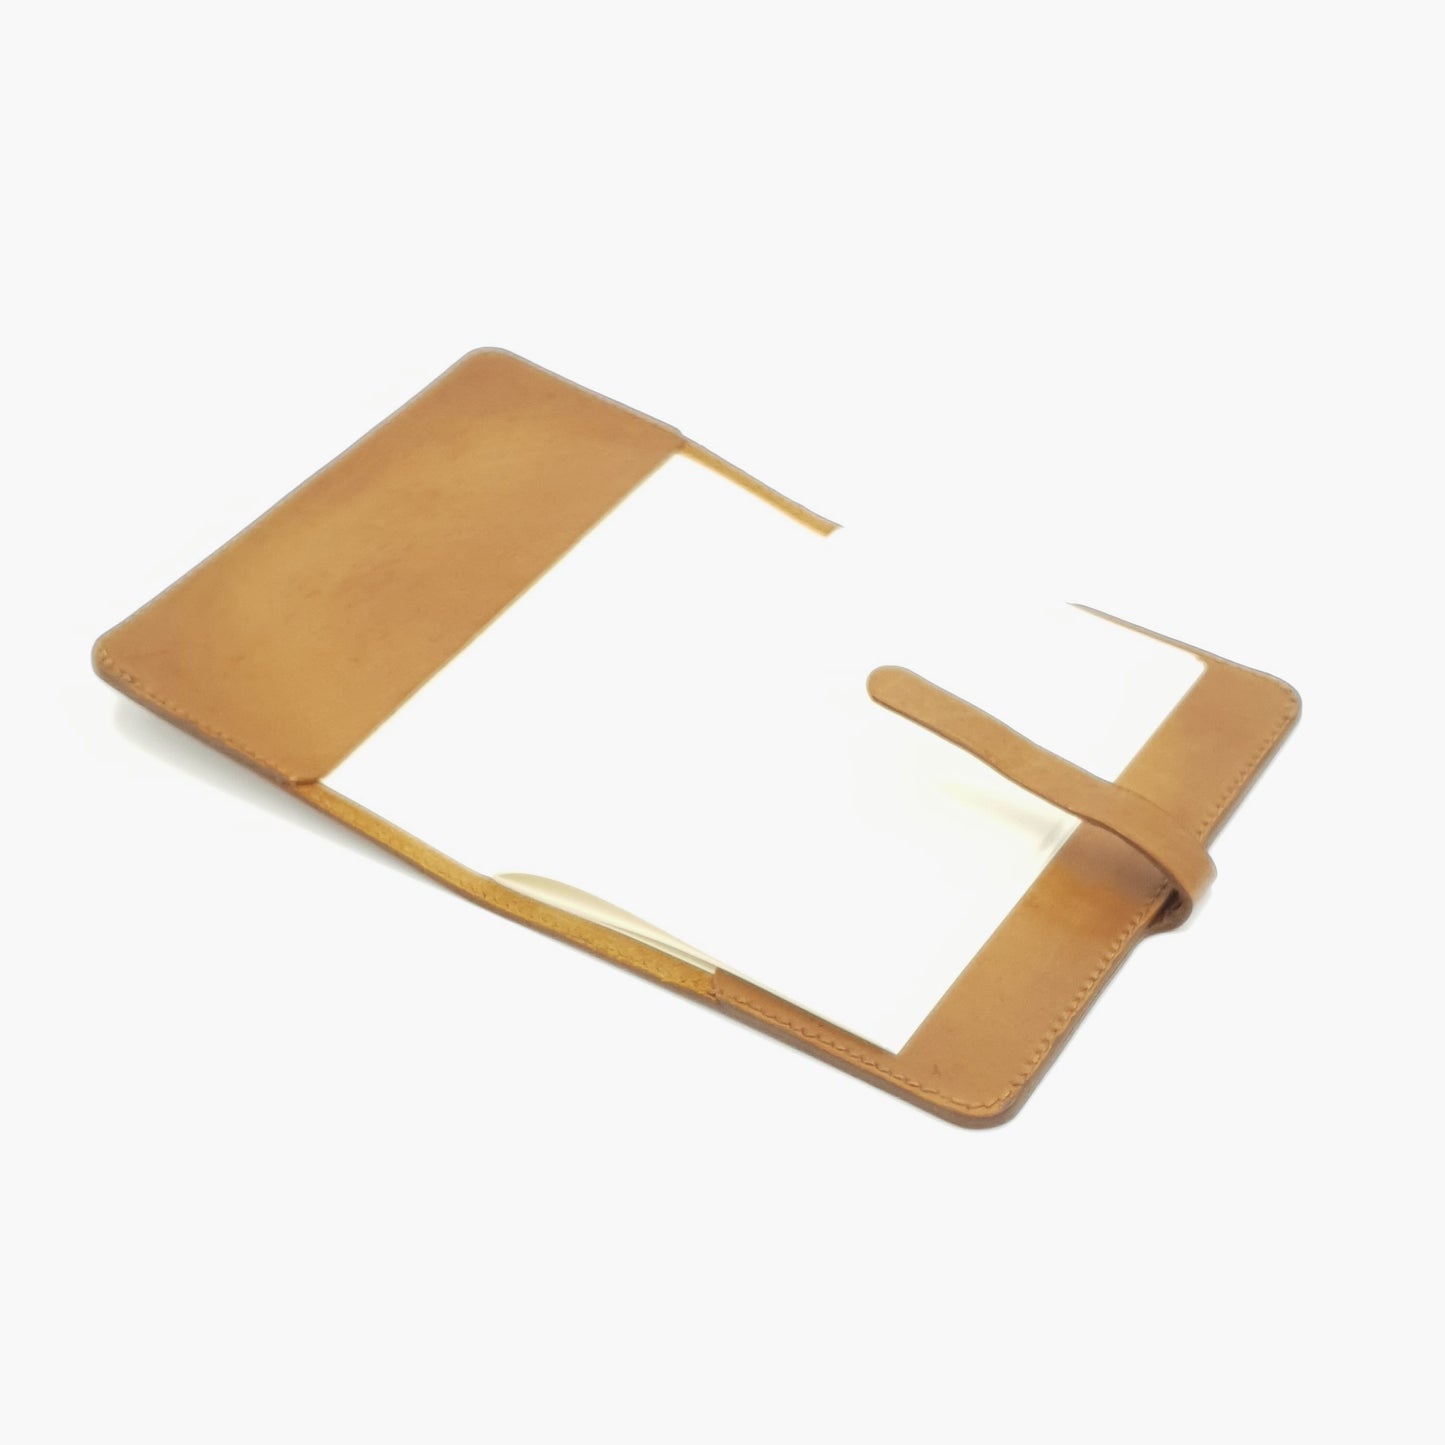 PICCOLO A6-P Traveller's Notebook Sleeve (Antique Edition)